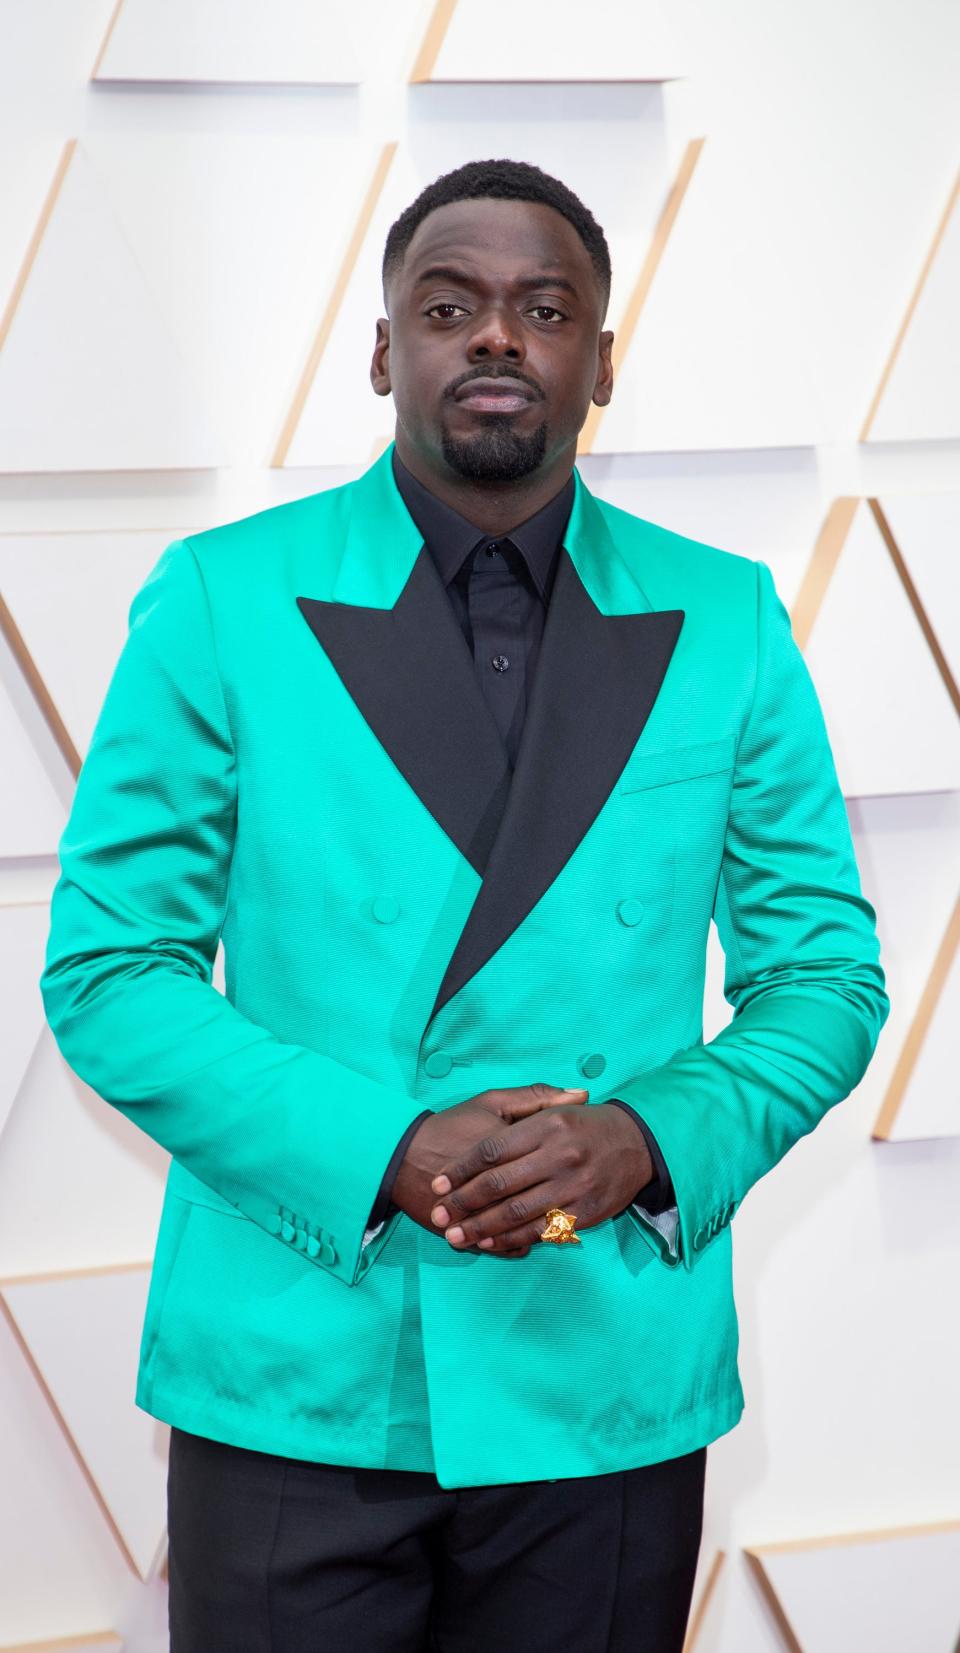 Daniel in a bright neon turquoise double breasted suit jacket with black lapels, a black shirt, and black trousers.